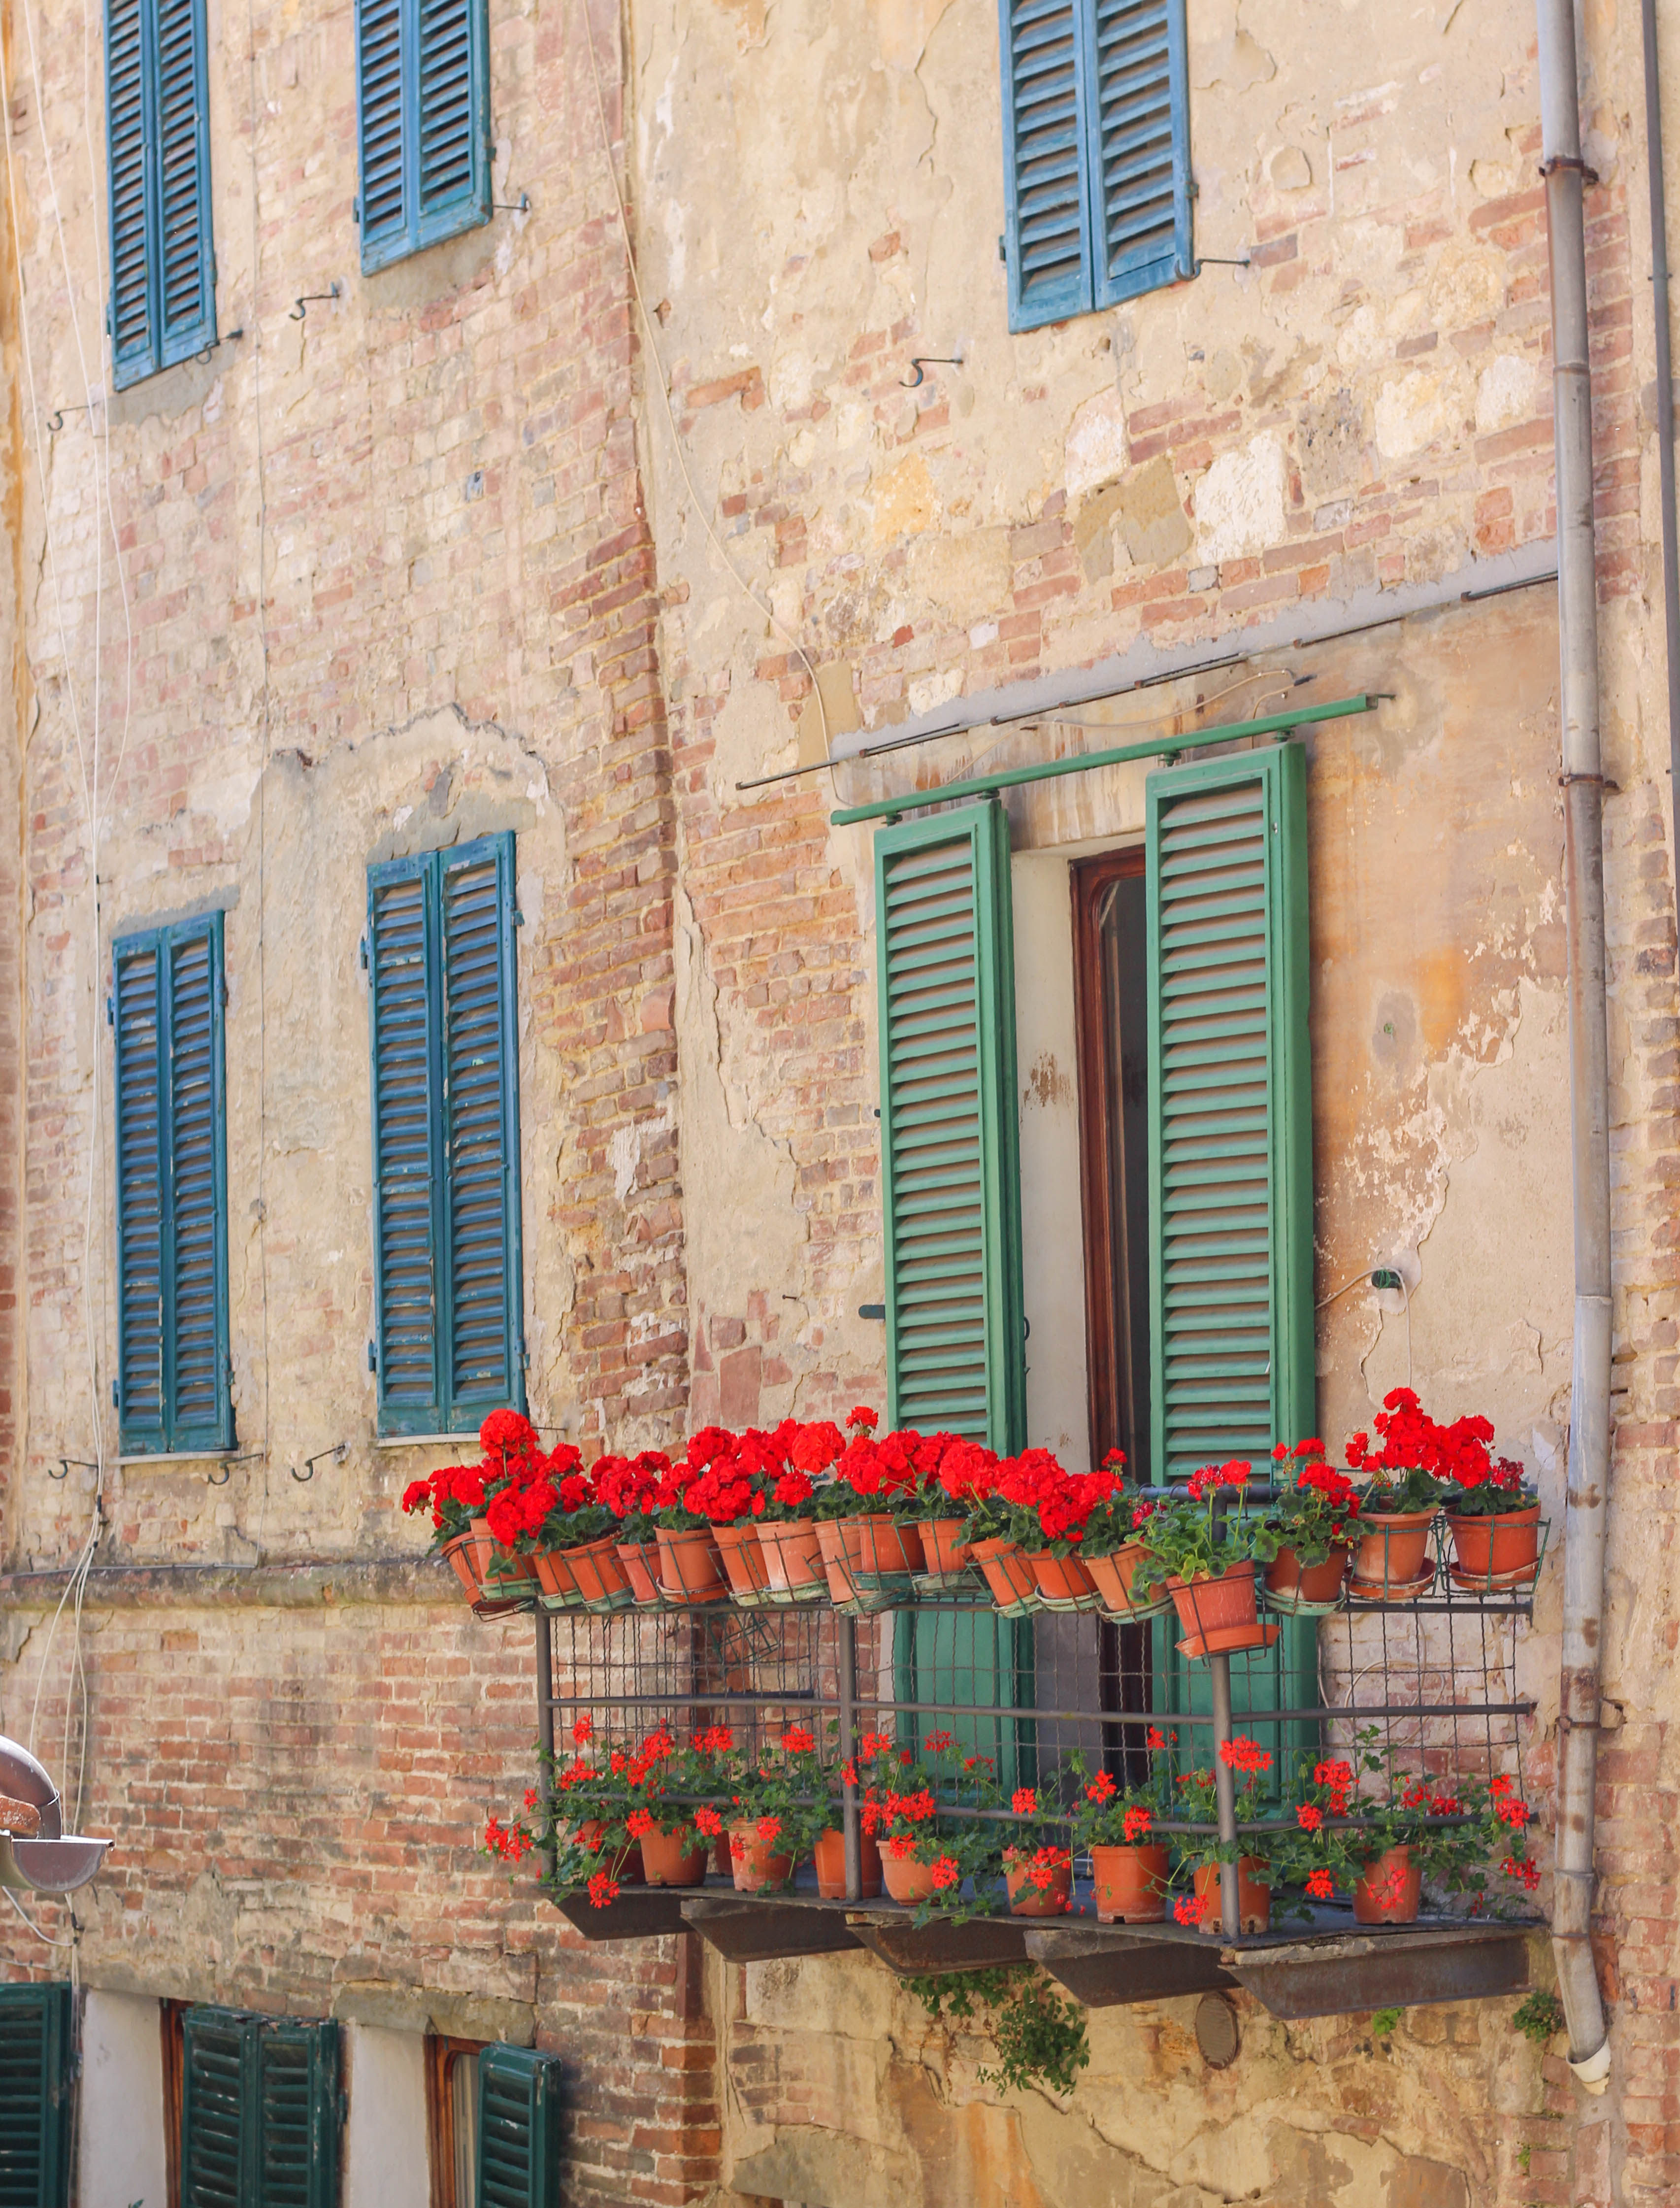 Montepulciano, Italy: Tuscany's Beloved Hilltop Town